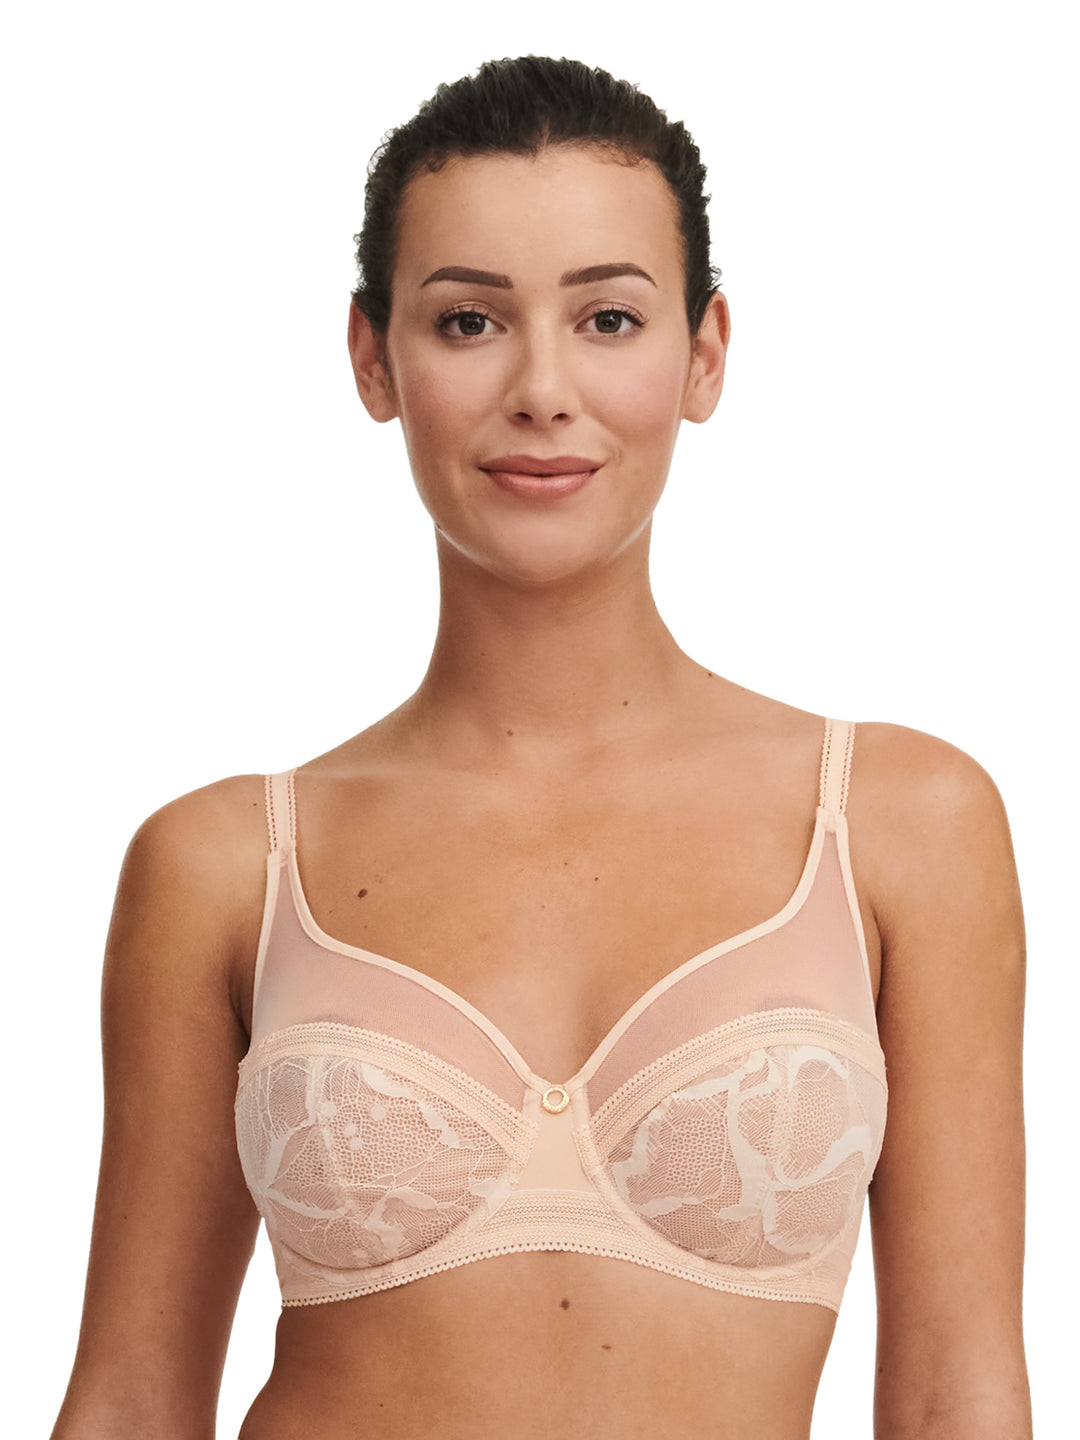 Chantelle True Lace Very Covering Underwired Bra - 골든 베이지 풀 컵 브라 Chantelle